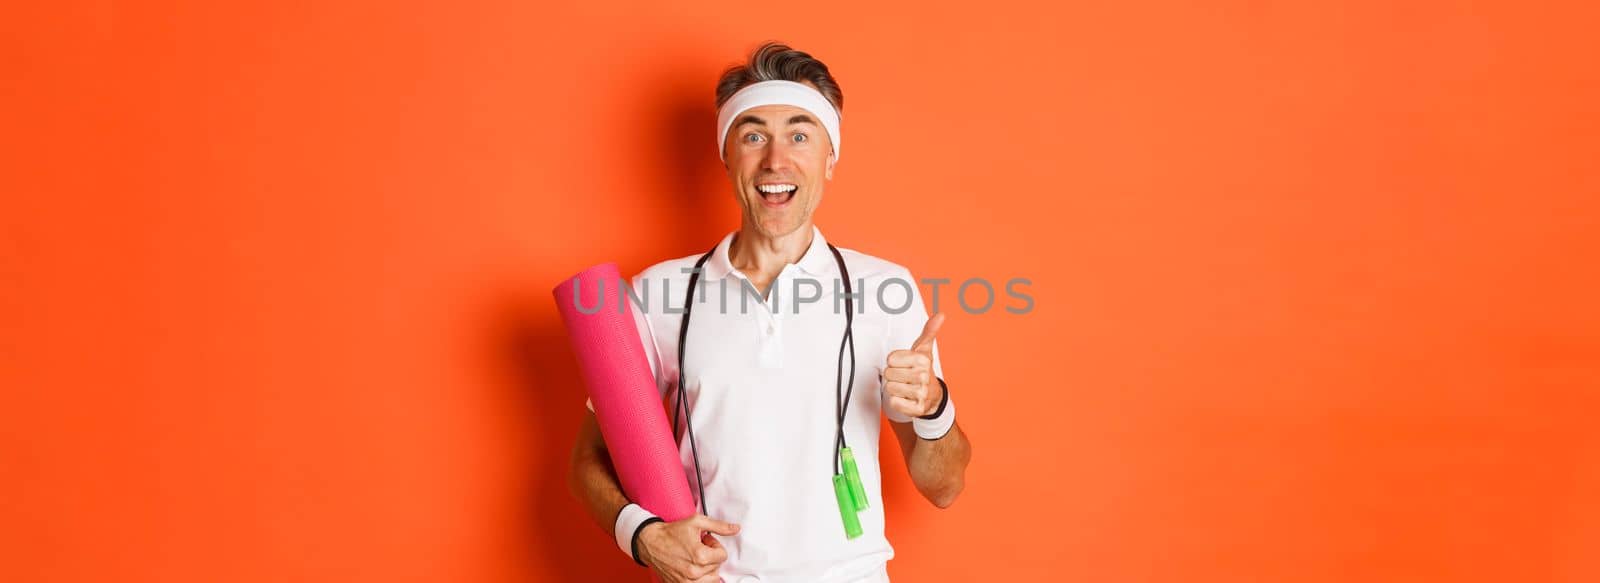 Concept of workout, gym and lifestyle. Cheerful middle-aged fitness guy, holding skipping rope and yoga mat, showing thumbs-up and smiling satisfied, standing over orange background.